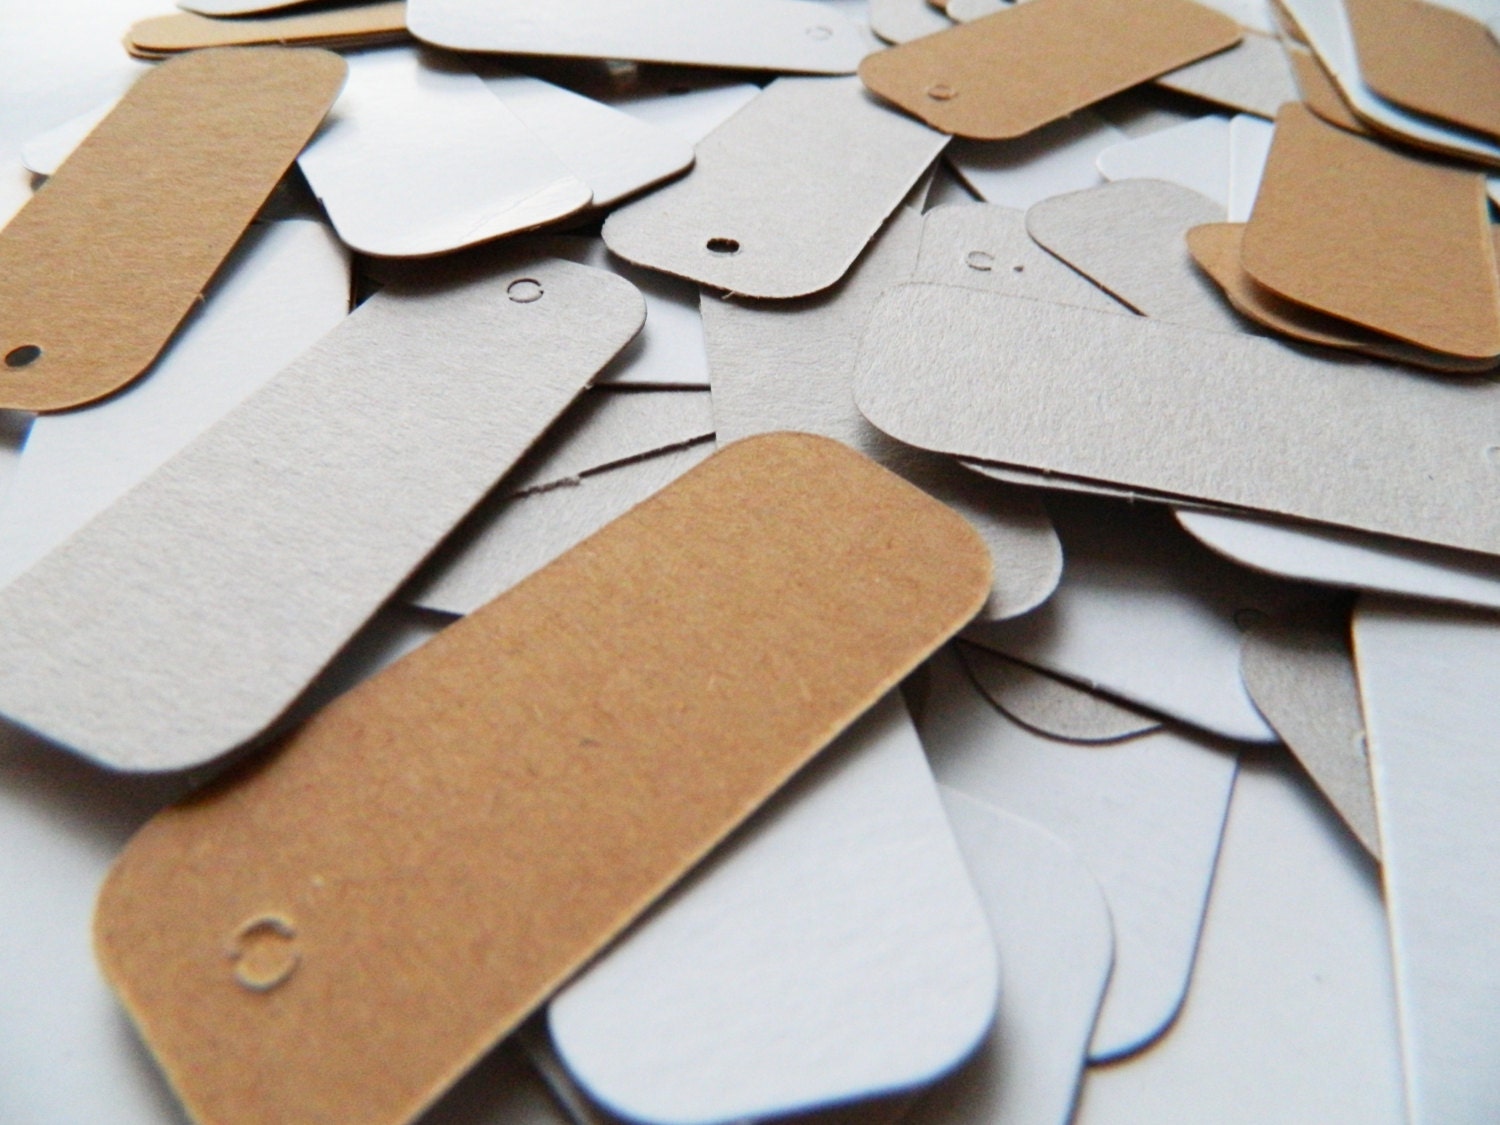 100 Small Gift Tags Die cuts I Double sided cardstock - kraft, gray and white I Price tags, DIY, thank you tags I 0.99x2.36" - FunkyBoxStudio